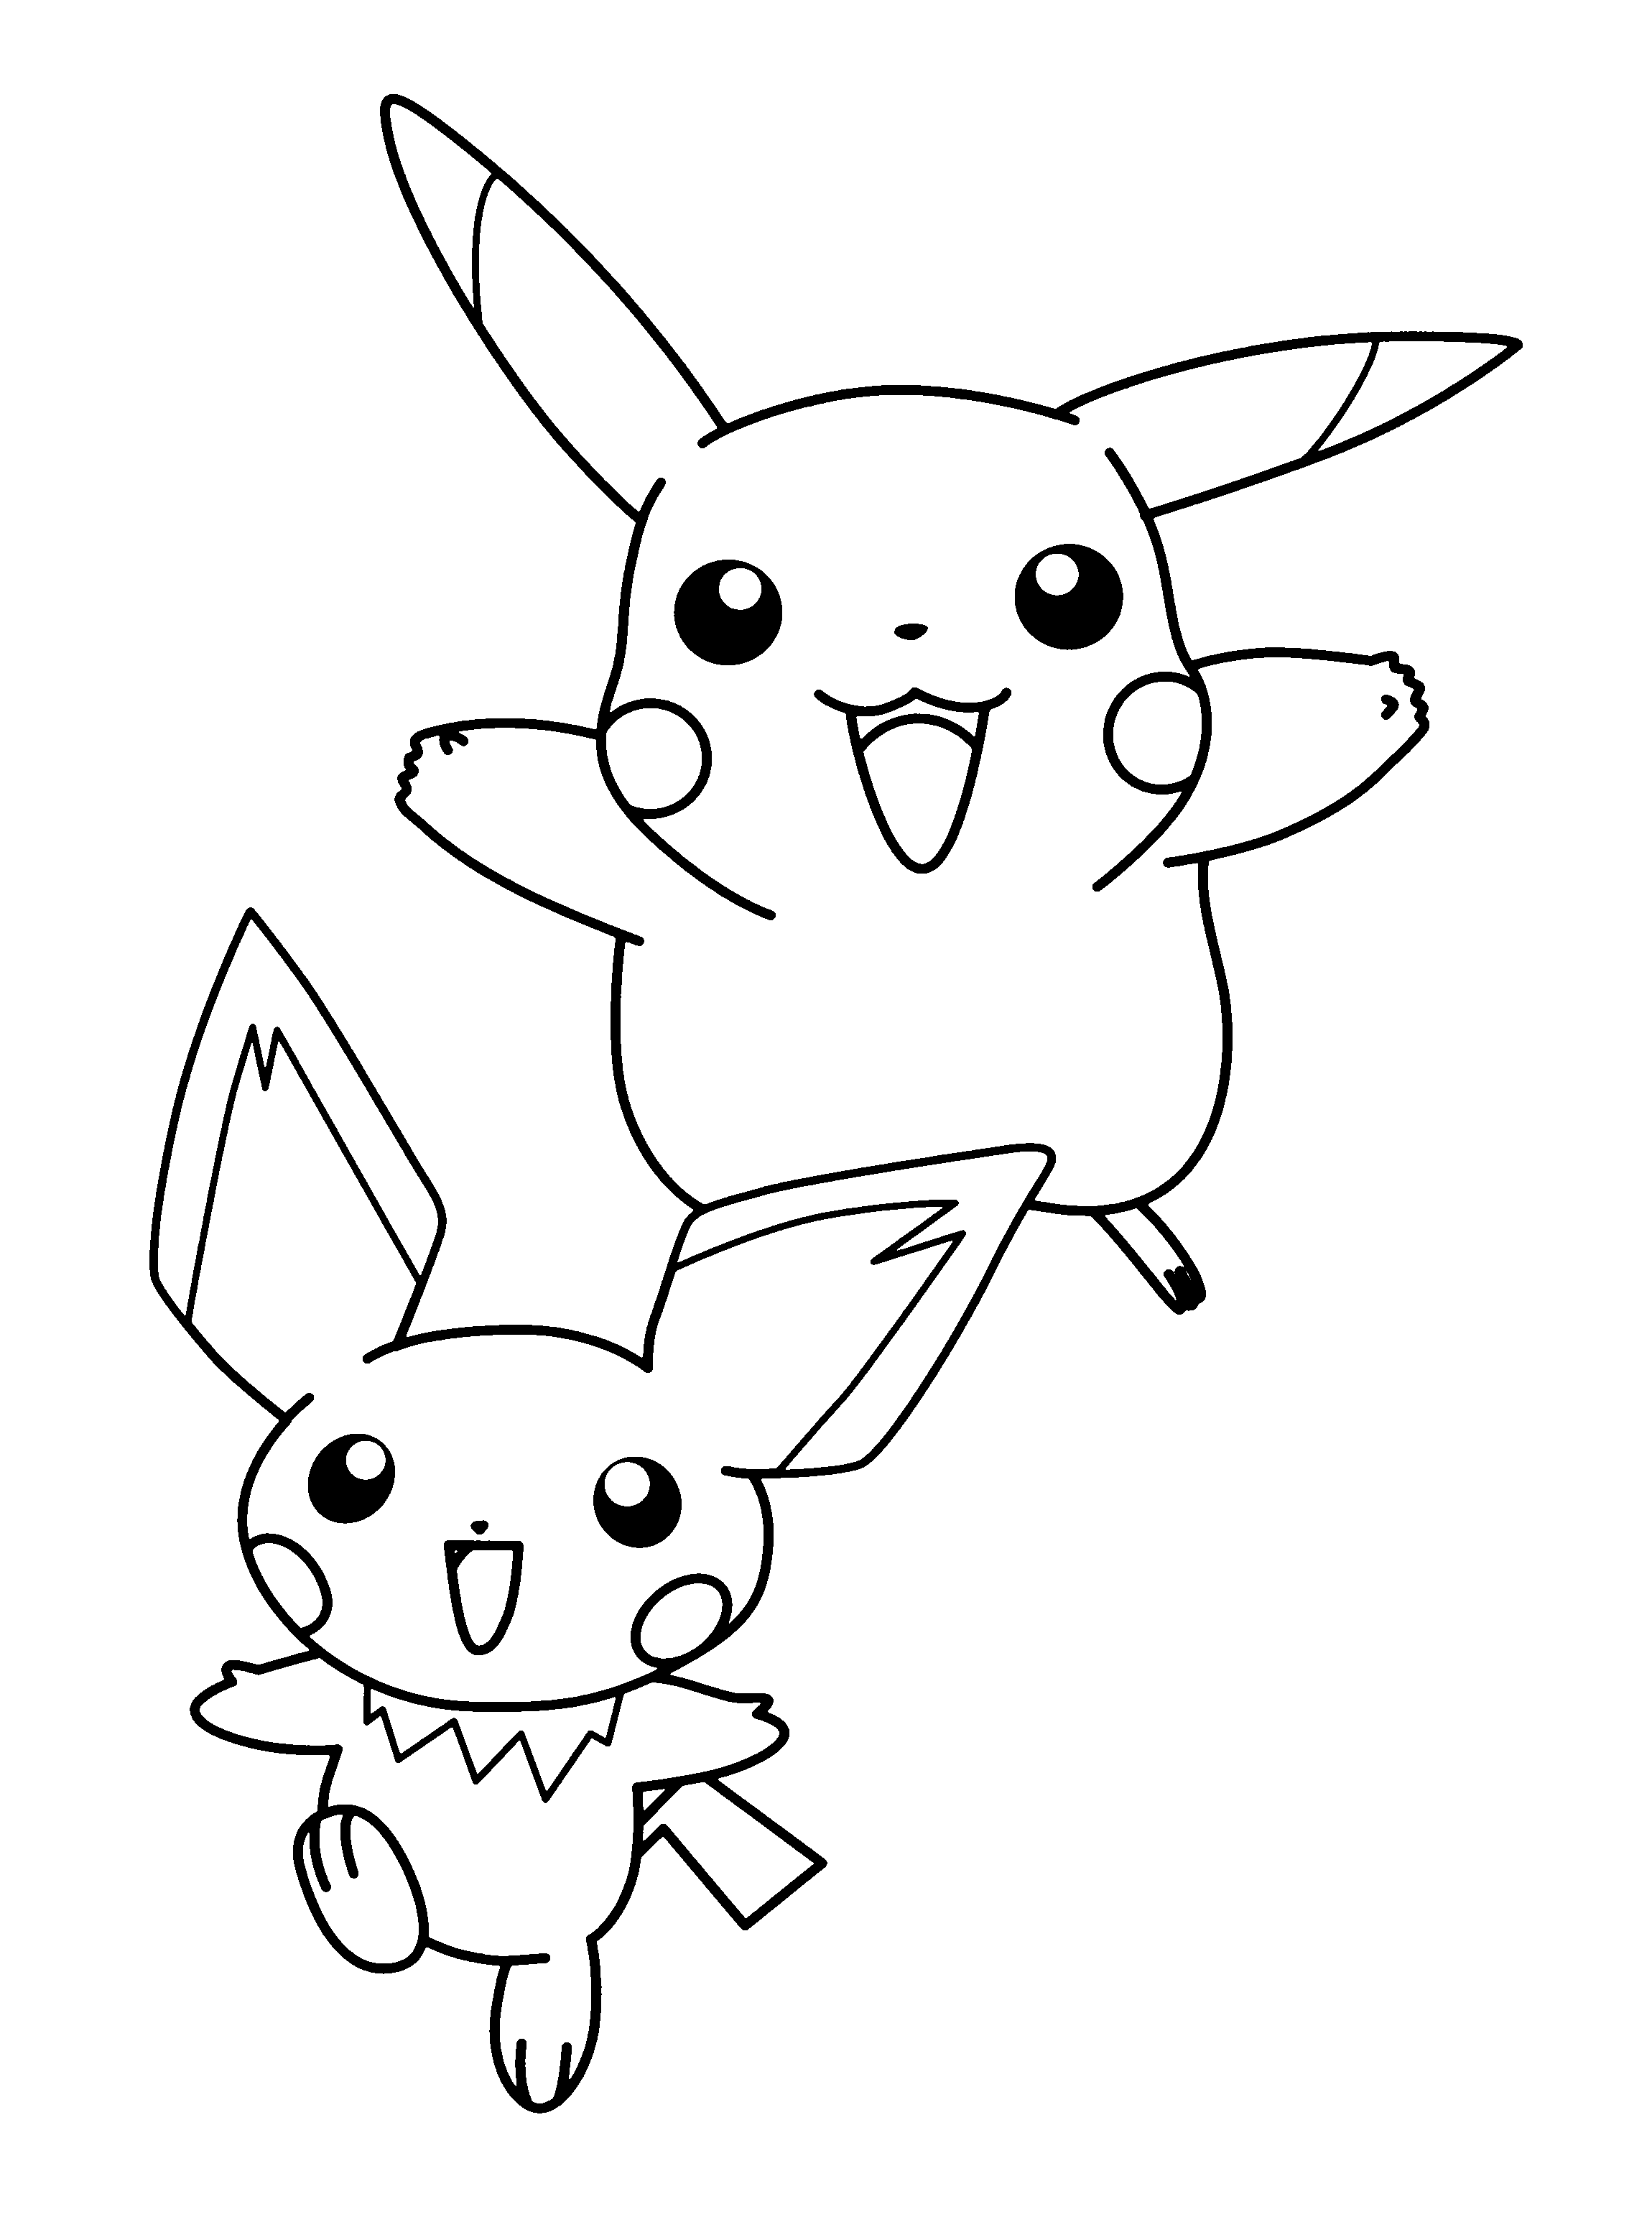 coloring pages for pokemon pokemon coloring pages coloring kids pokemon coloring for pokemon coloring pages 